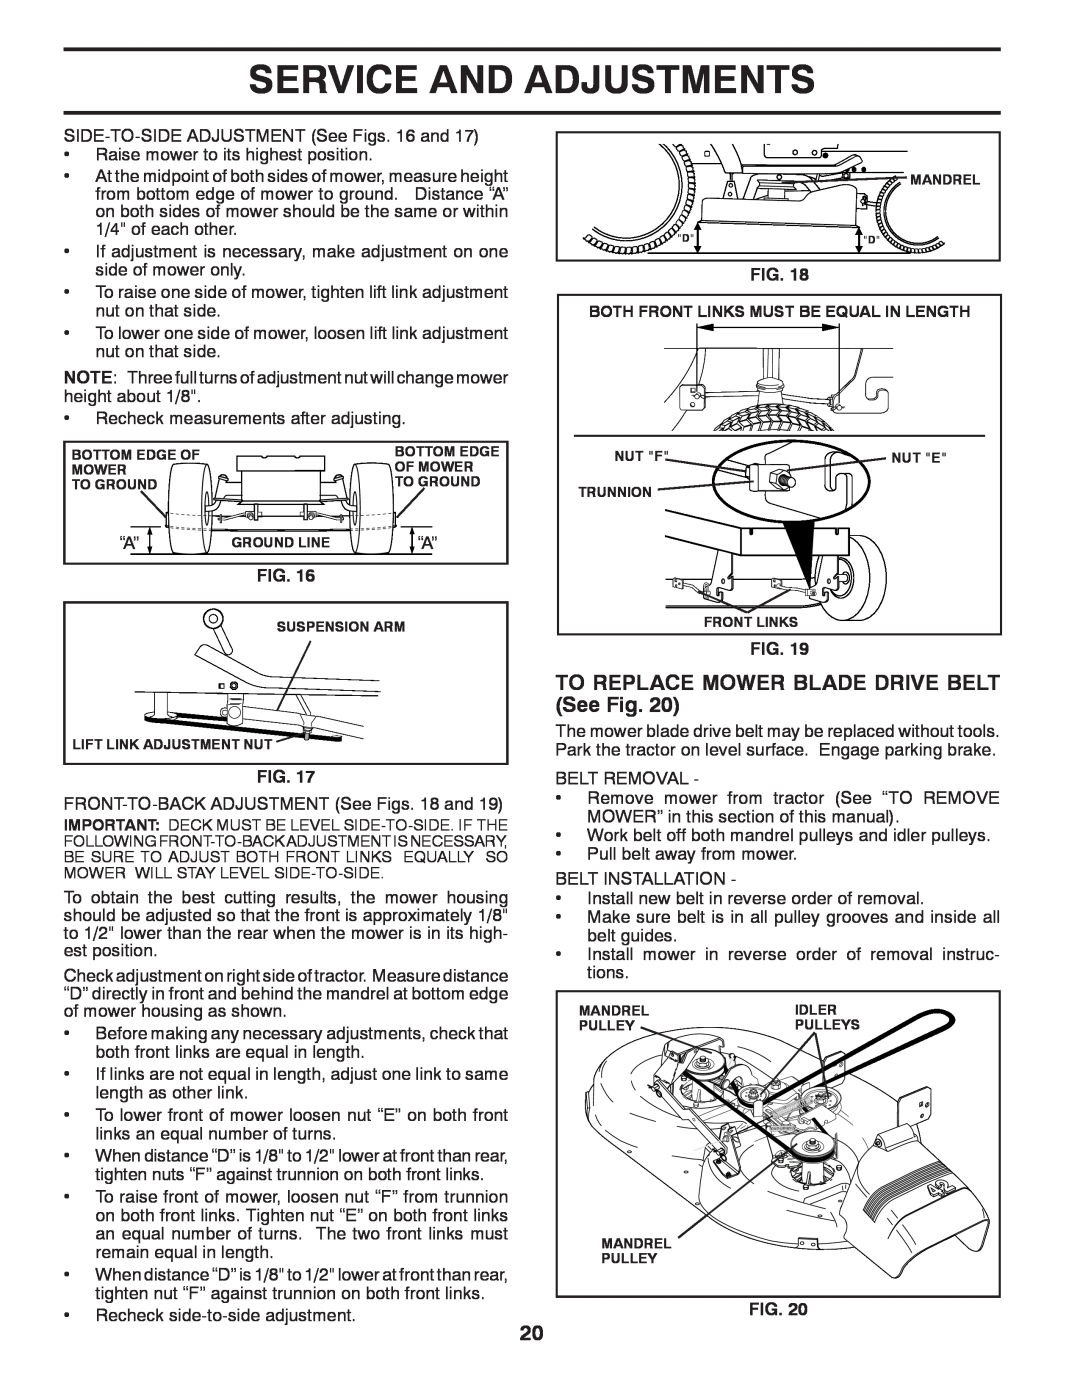 Poulan 419450 manual TO REPLACE MOWER BLADE DRIVE BELT See Fig, Service And Adjustments 